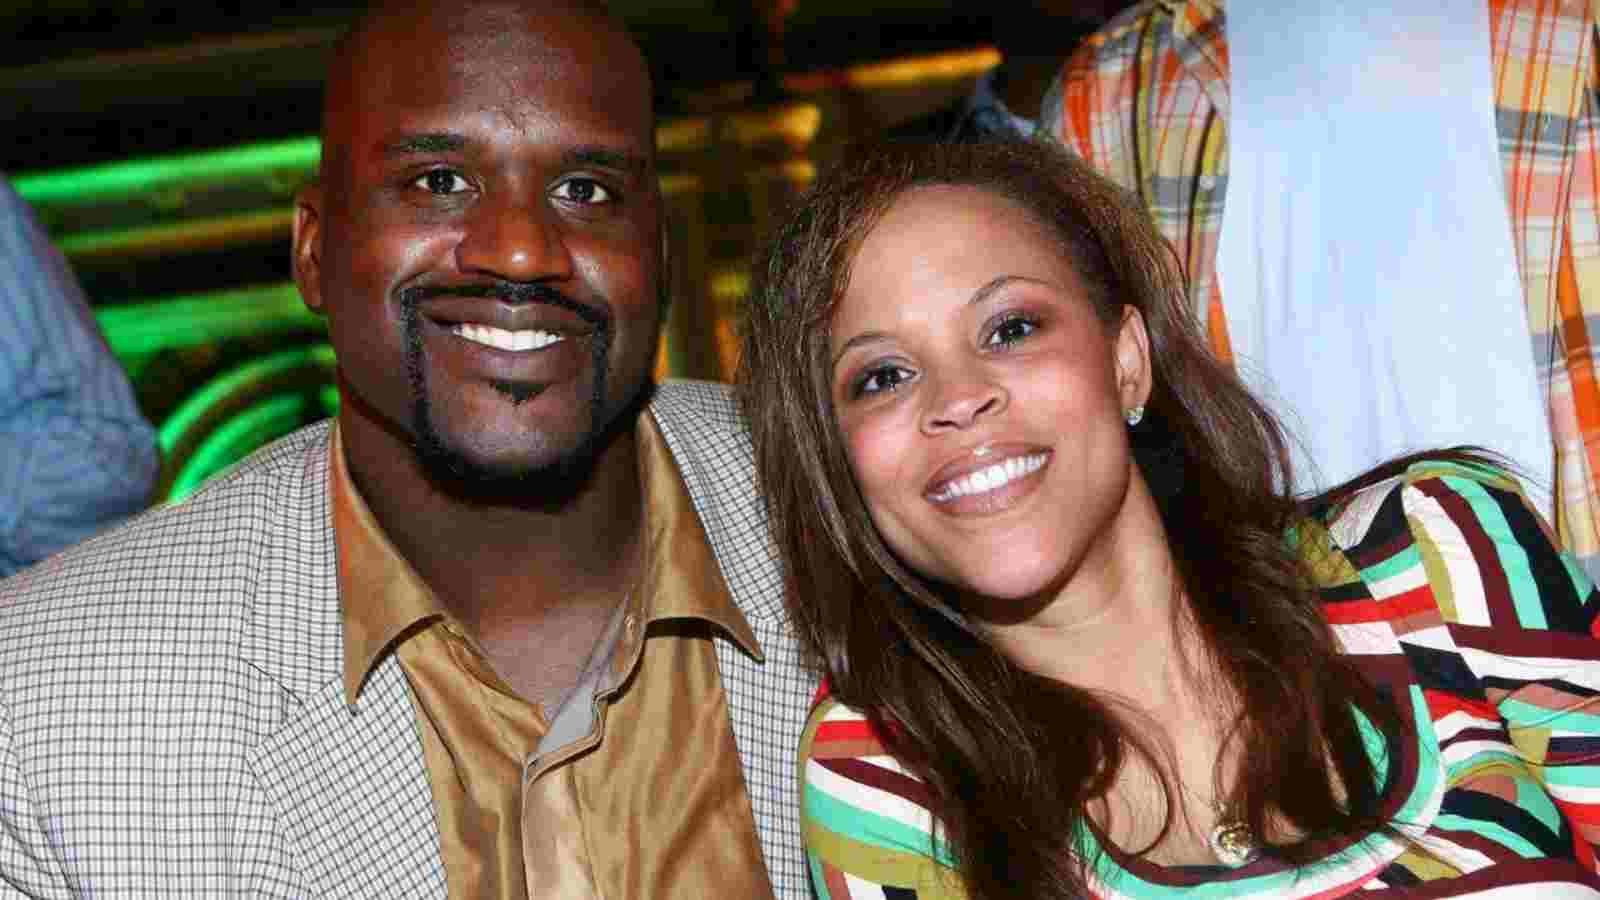 Shaquille O'Neal and Shaunie